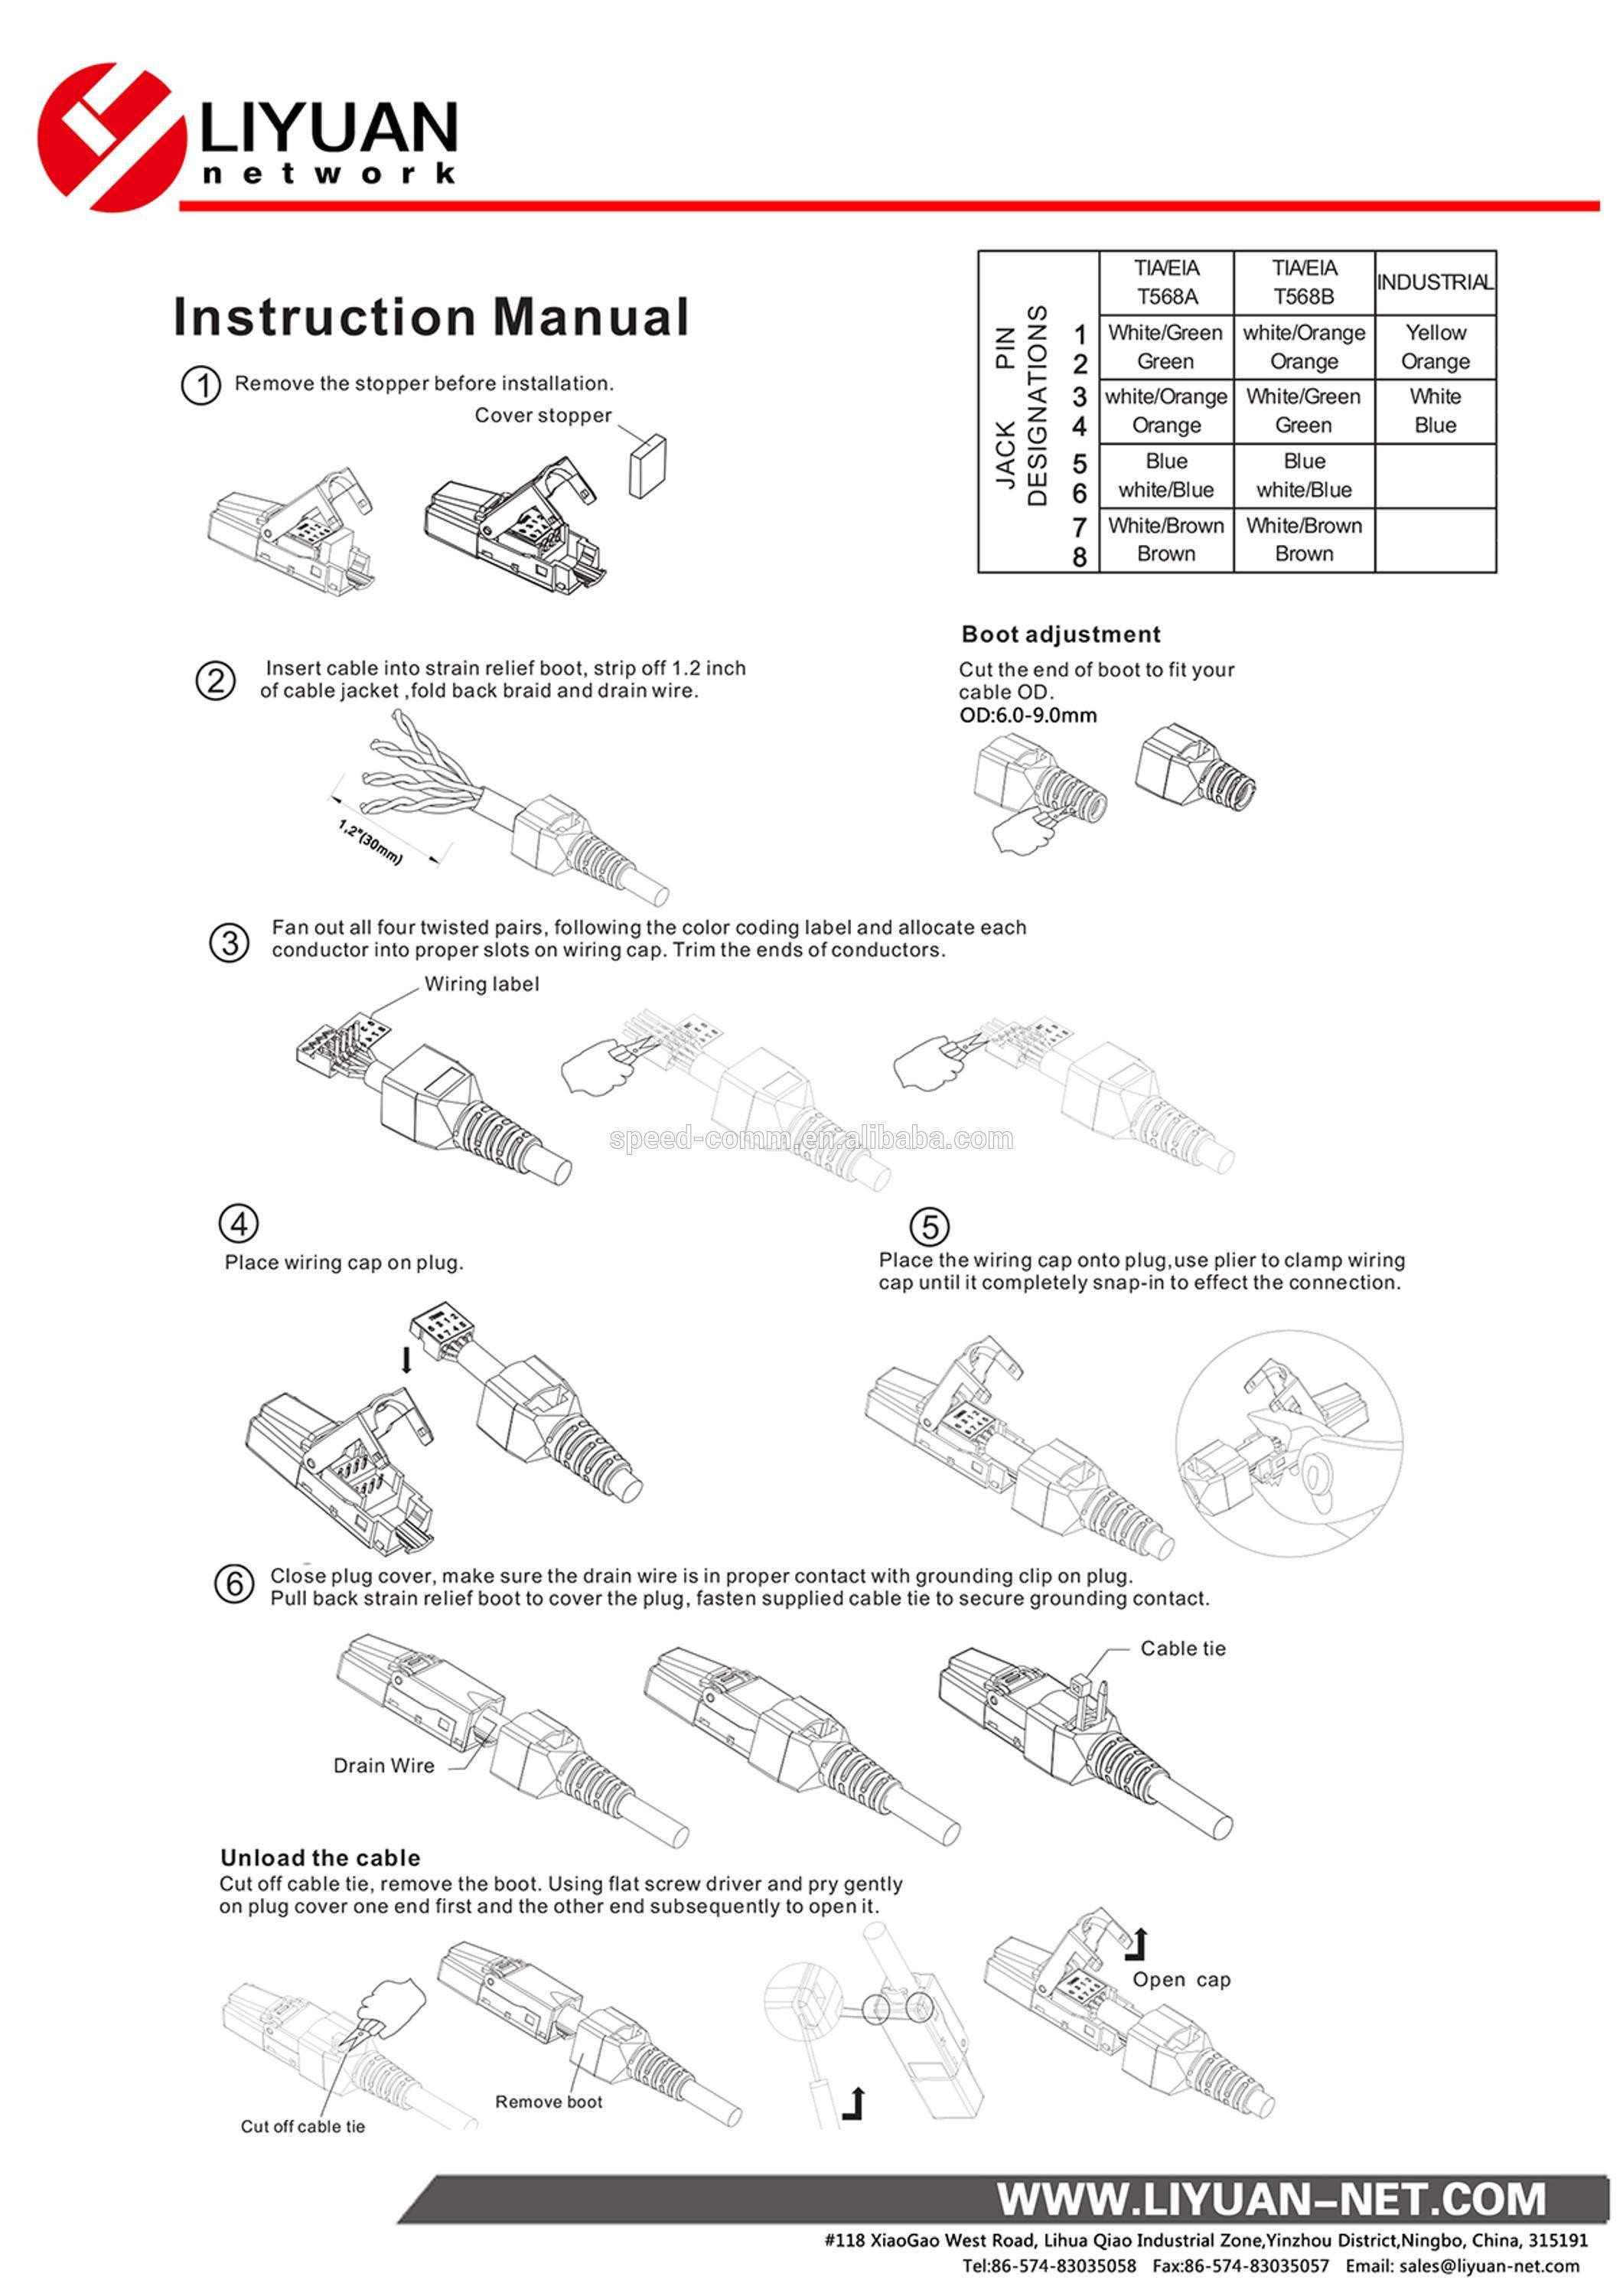 Wiring Diagram for Cat5 Crossover Cable Refrence Amazing Rj45 Installation Image Best for Wiring Diagram